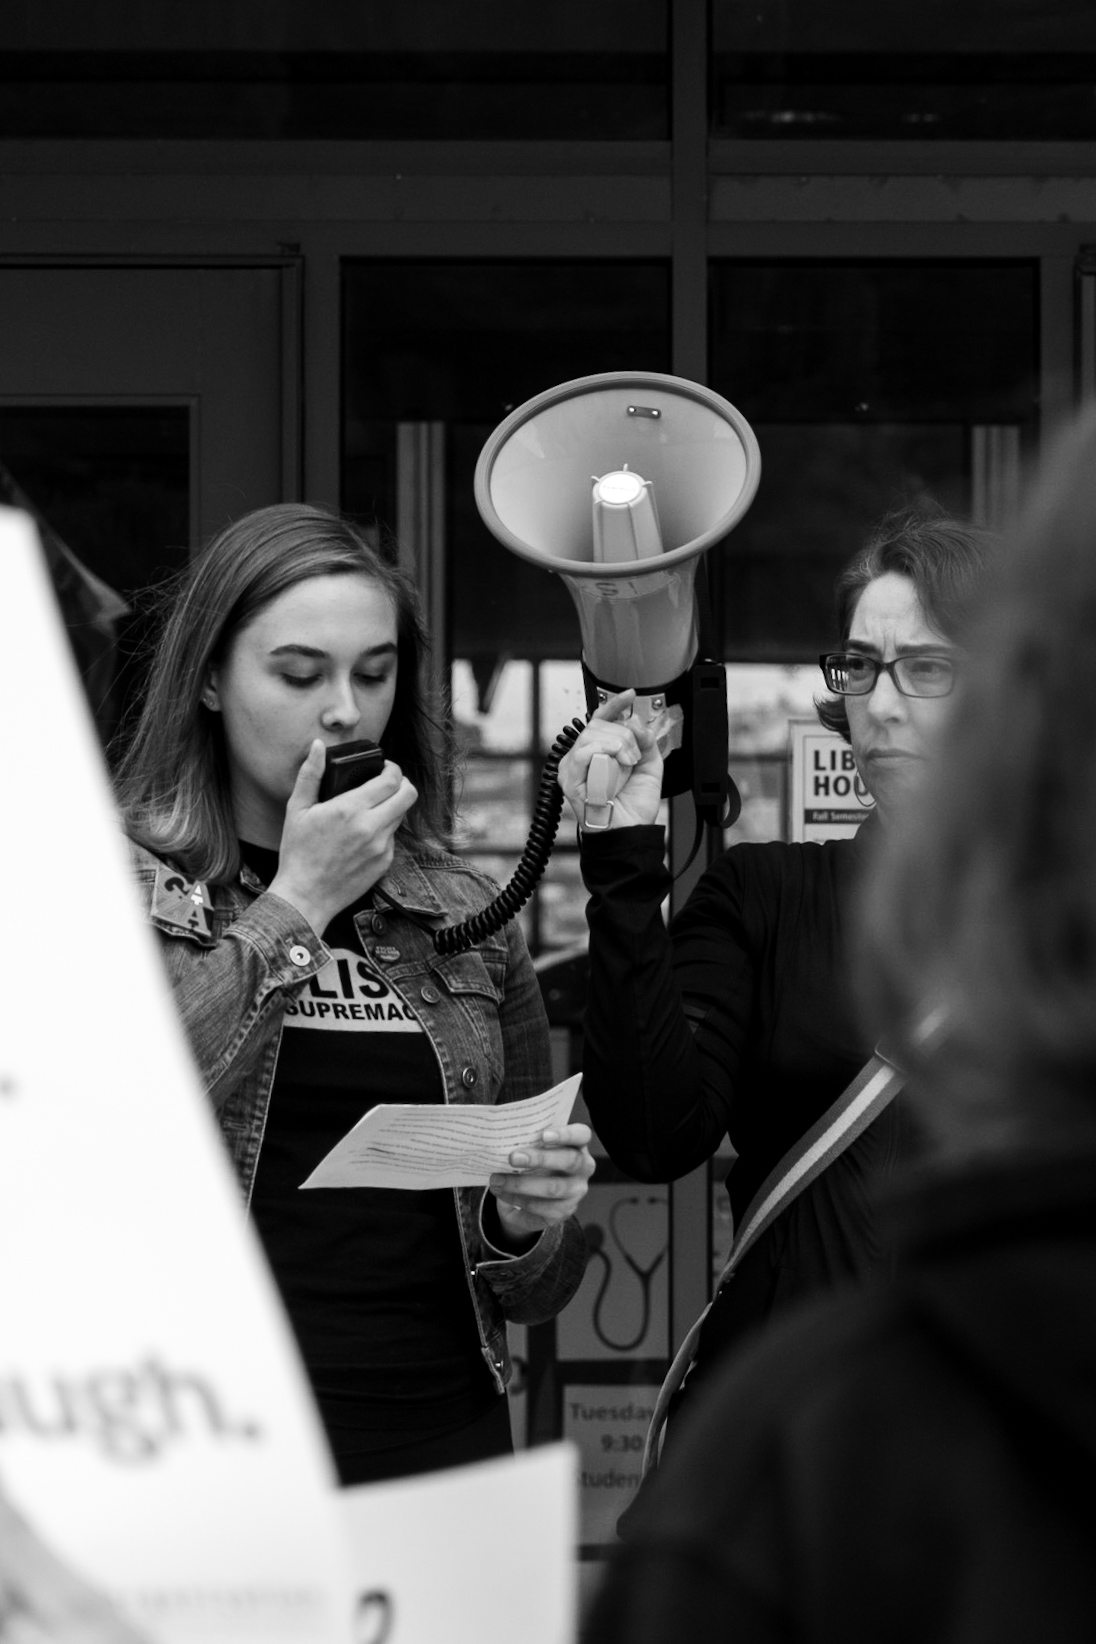 Isabella Hord, left, reads out her statements against Supreme Court nominee, Brett Kavanaugh during the 30 minute speakout that cut through the 12:30 p.m. class break on Wednesday, Oct. 4. Photo by Cliff Fernandes/The Guardsman